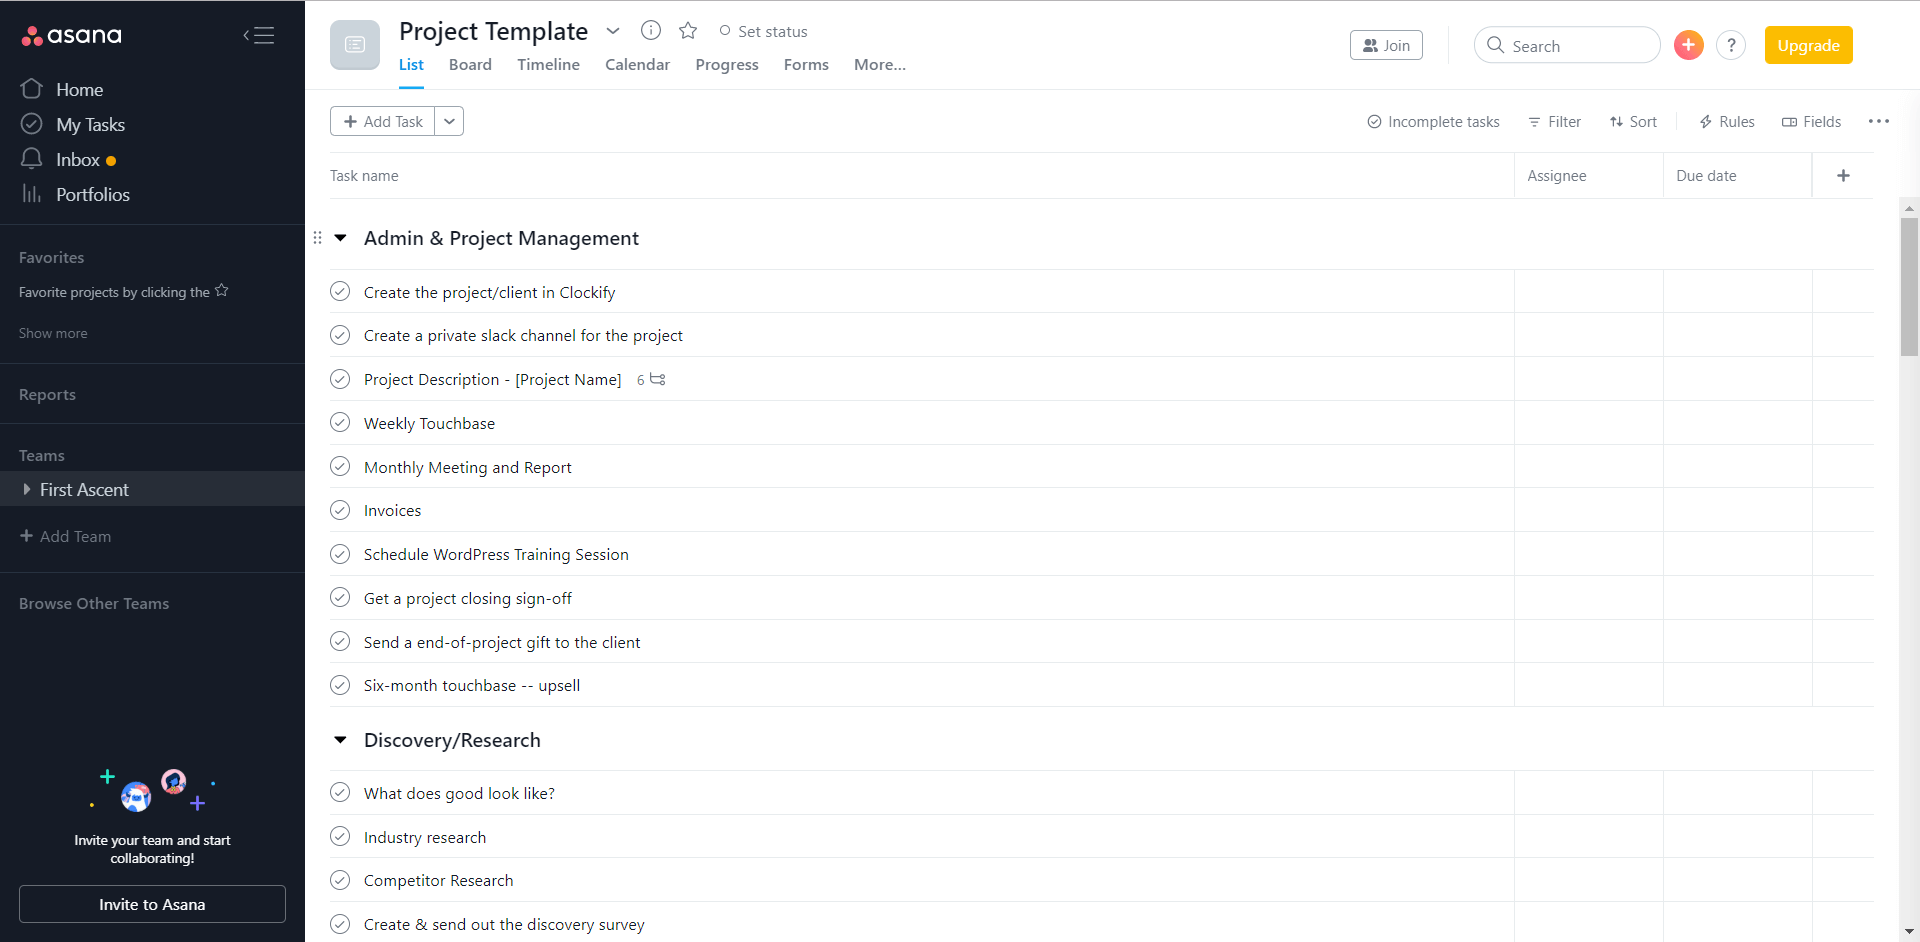 Image of a project template in Asana. Various tasks and project groups are listed from top to bottom.